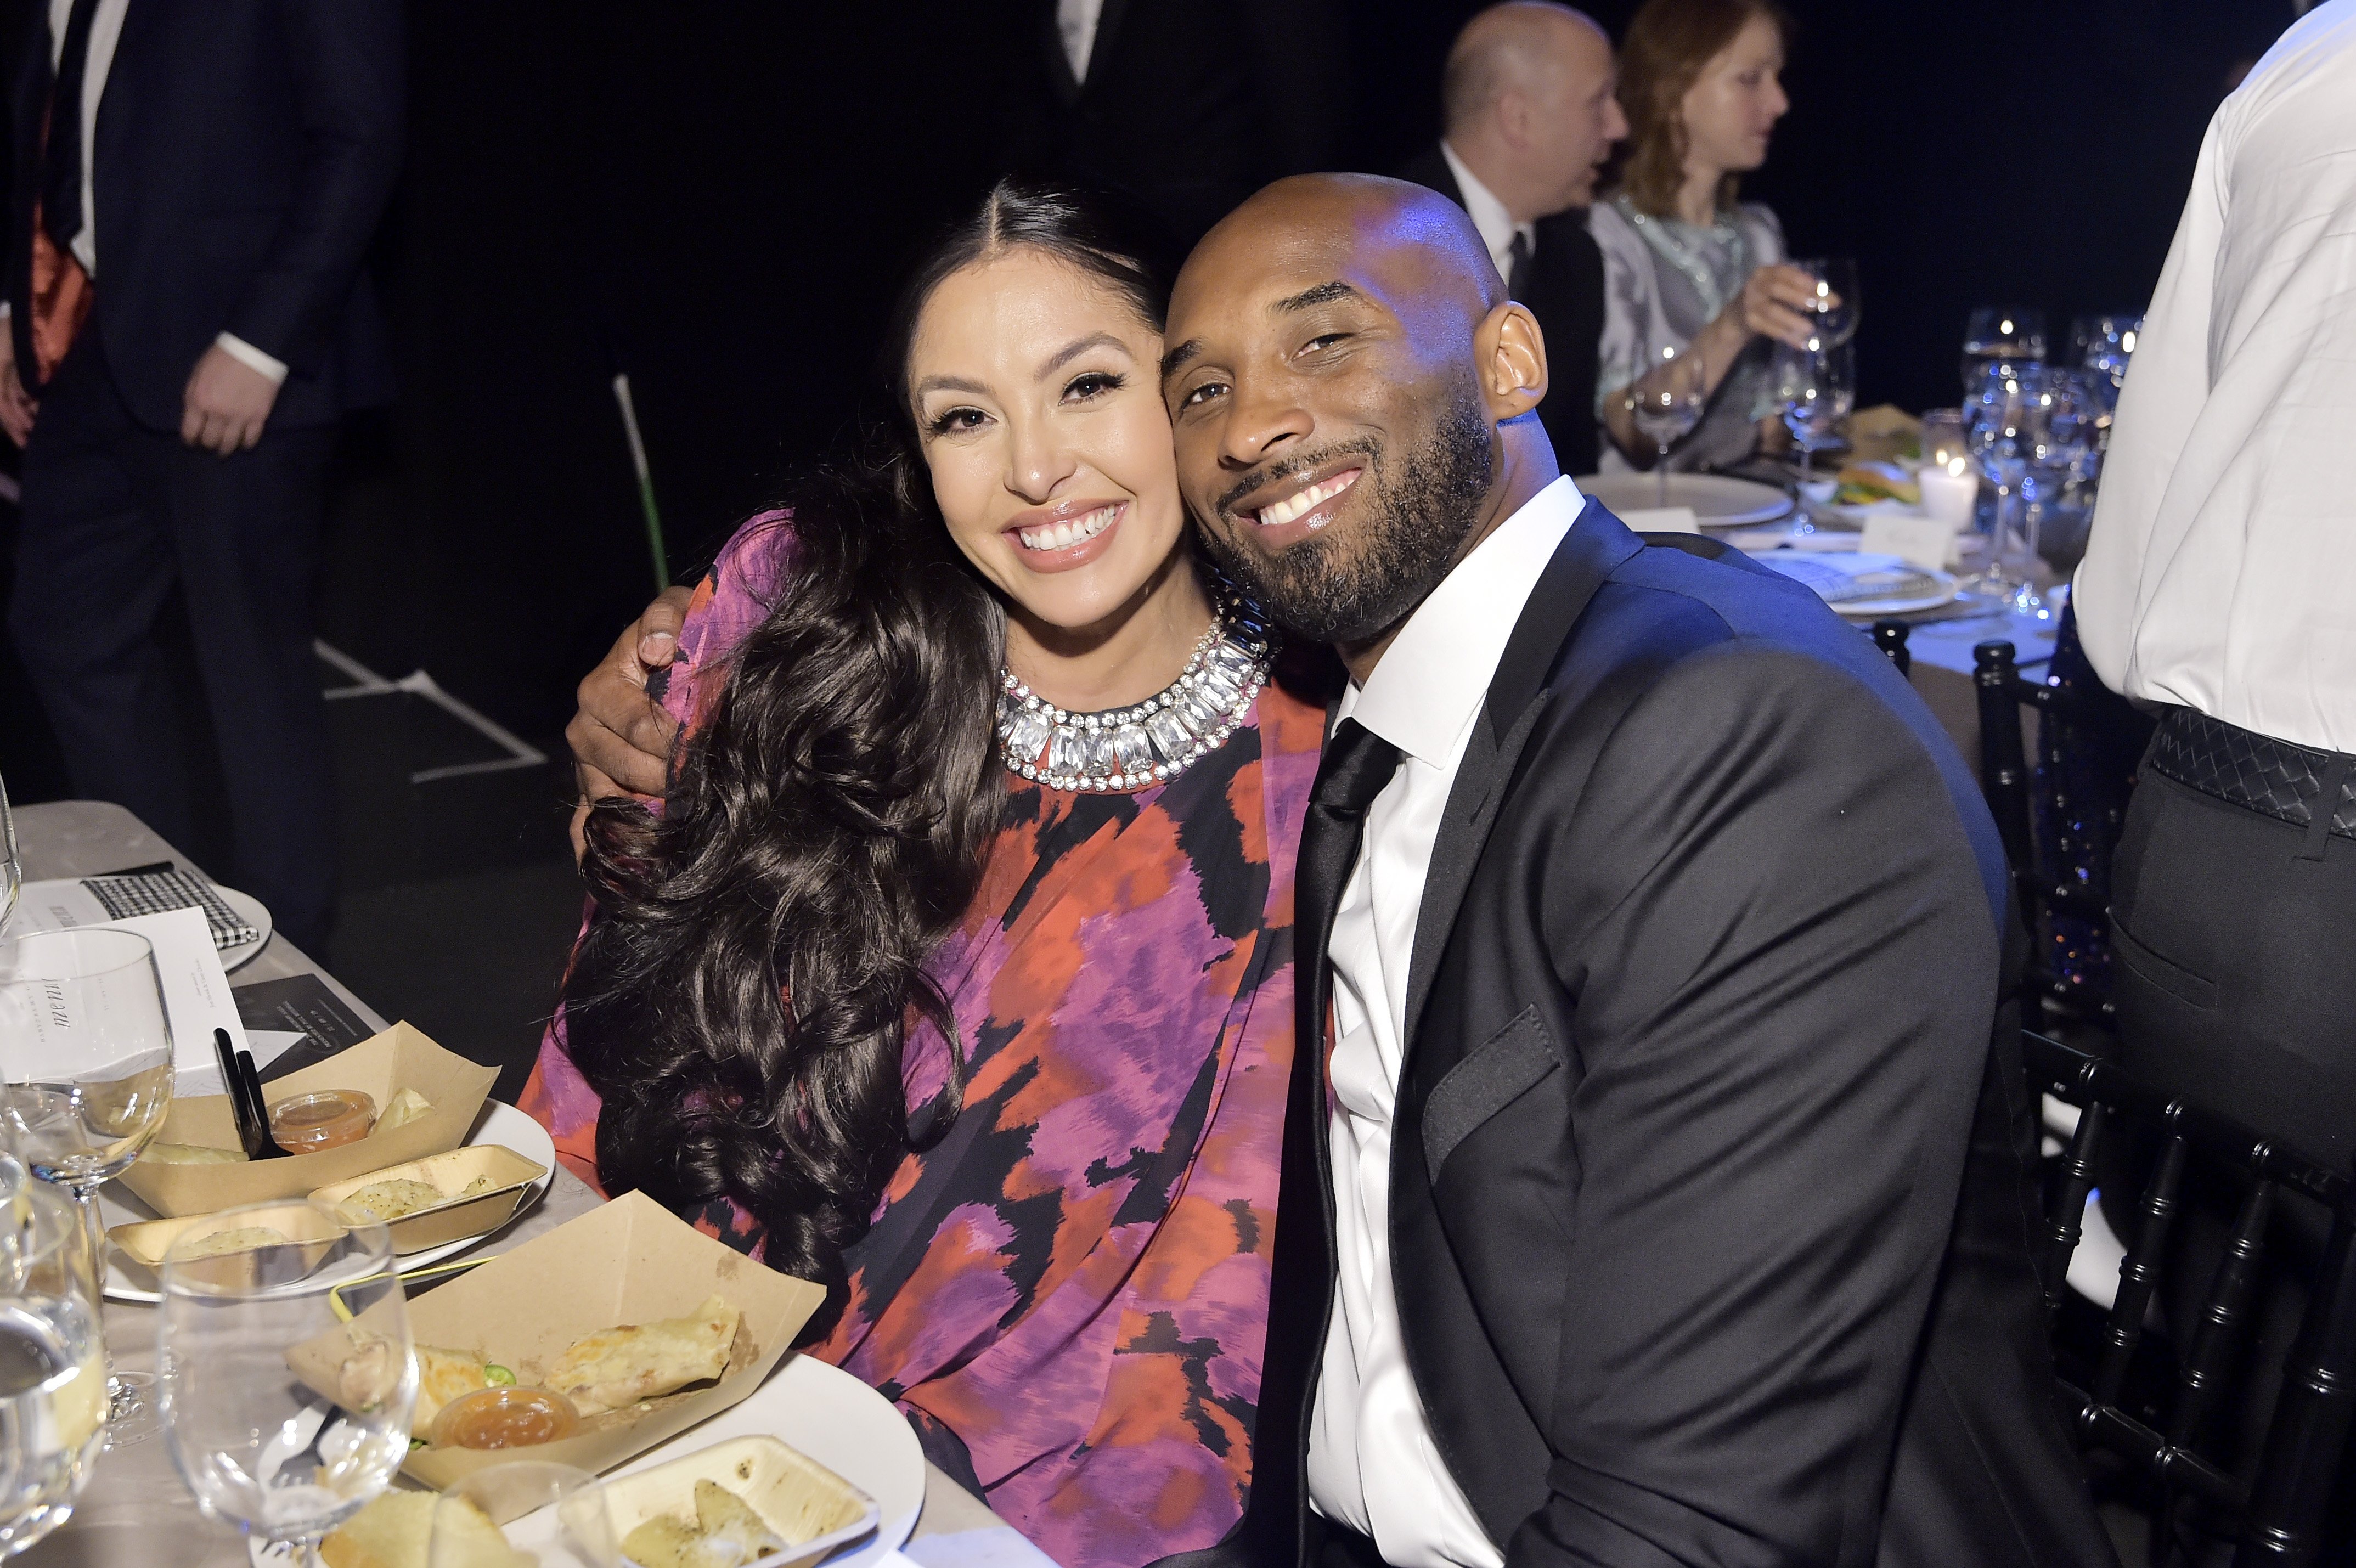 Vanessa and Kobe Bryant at the 2019 Baby2Baby Gala presented by Paul Mitchell in November 2019 | Photo: GettyImages